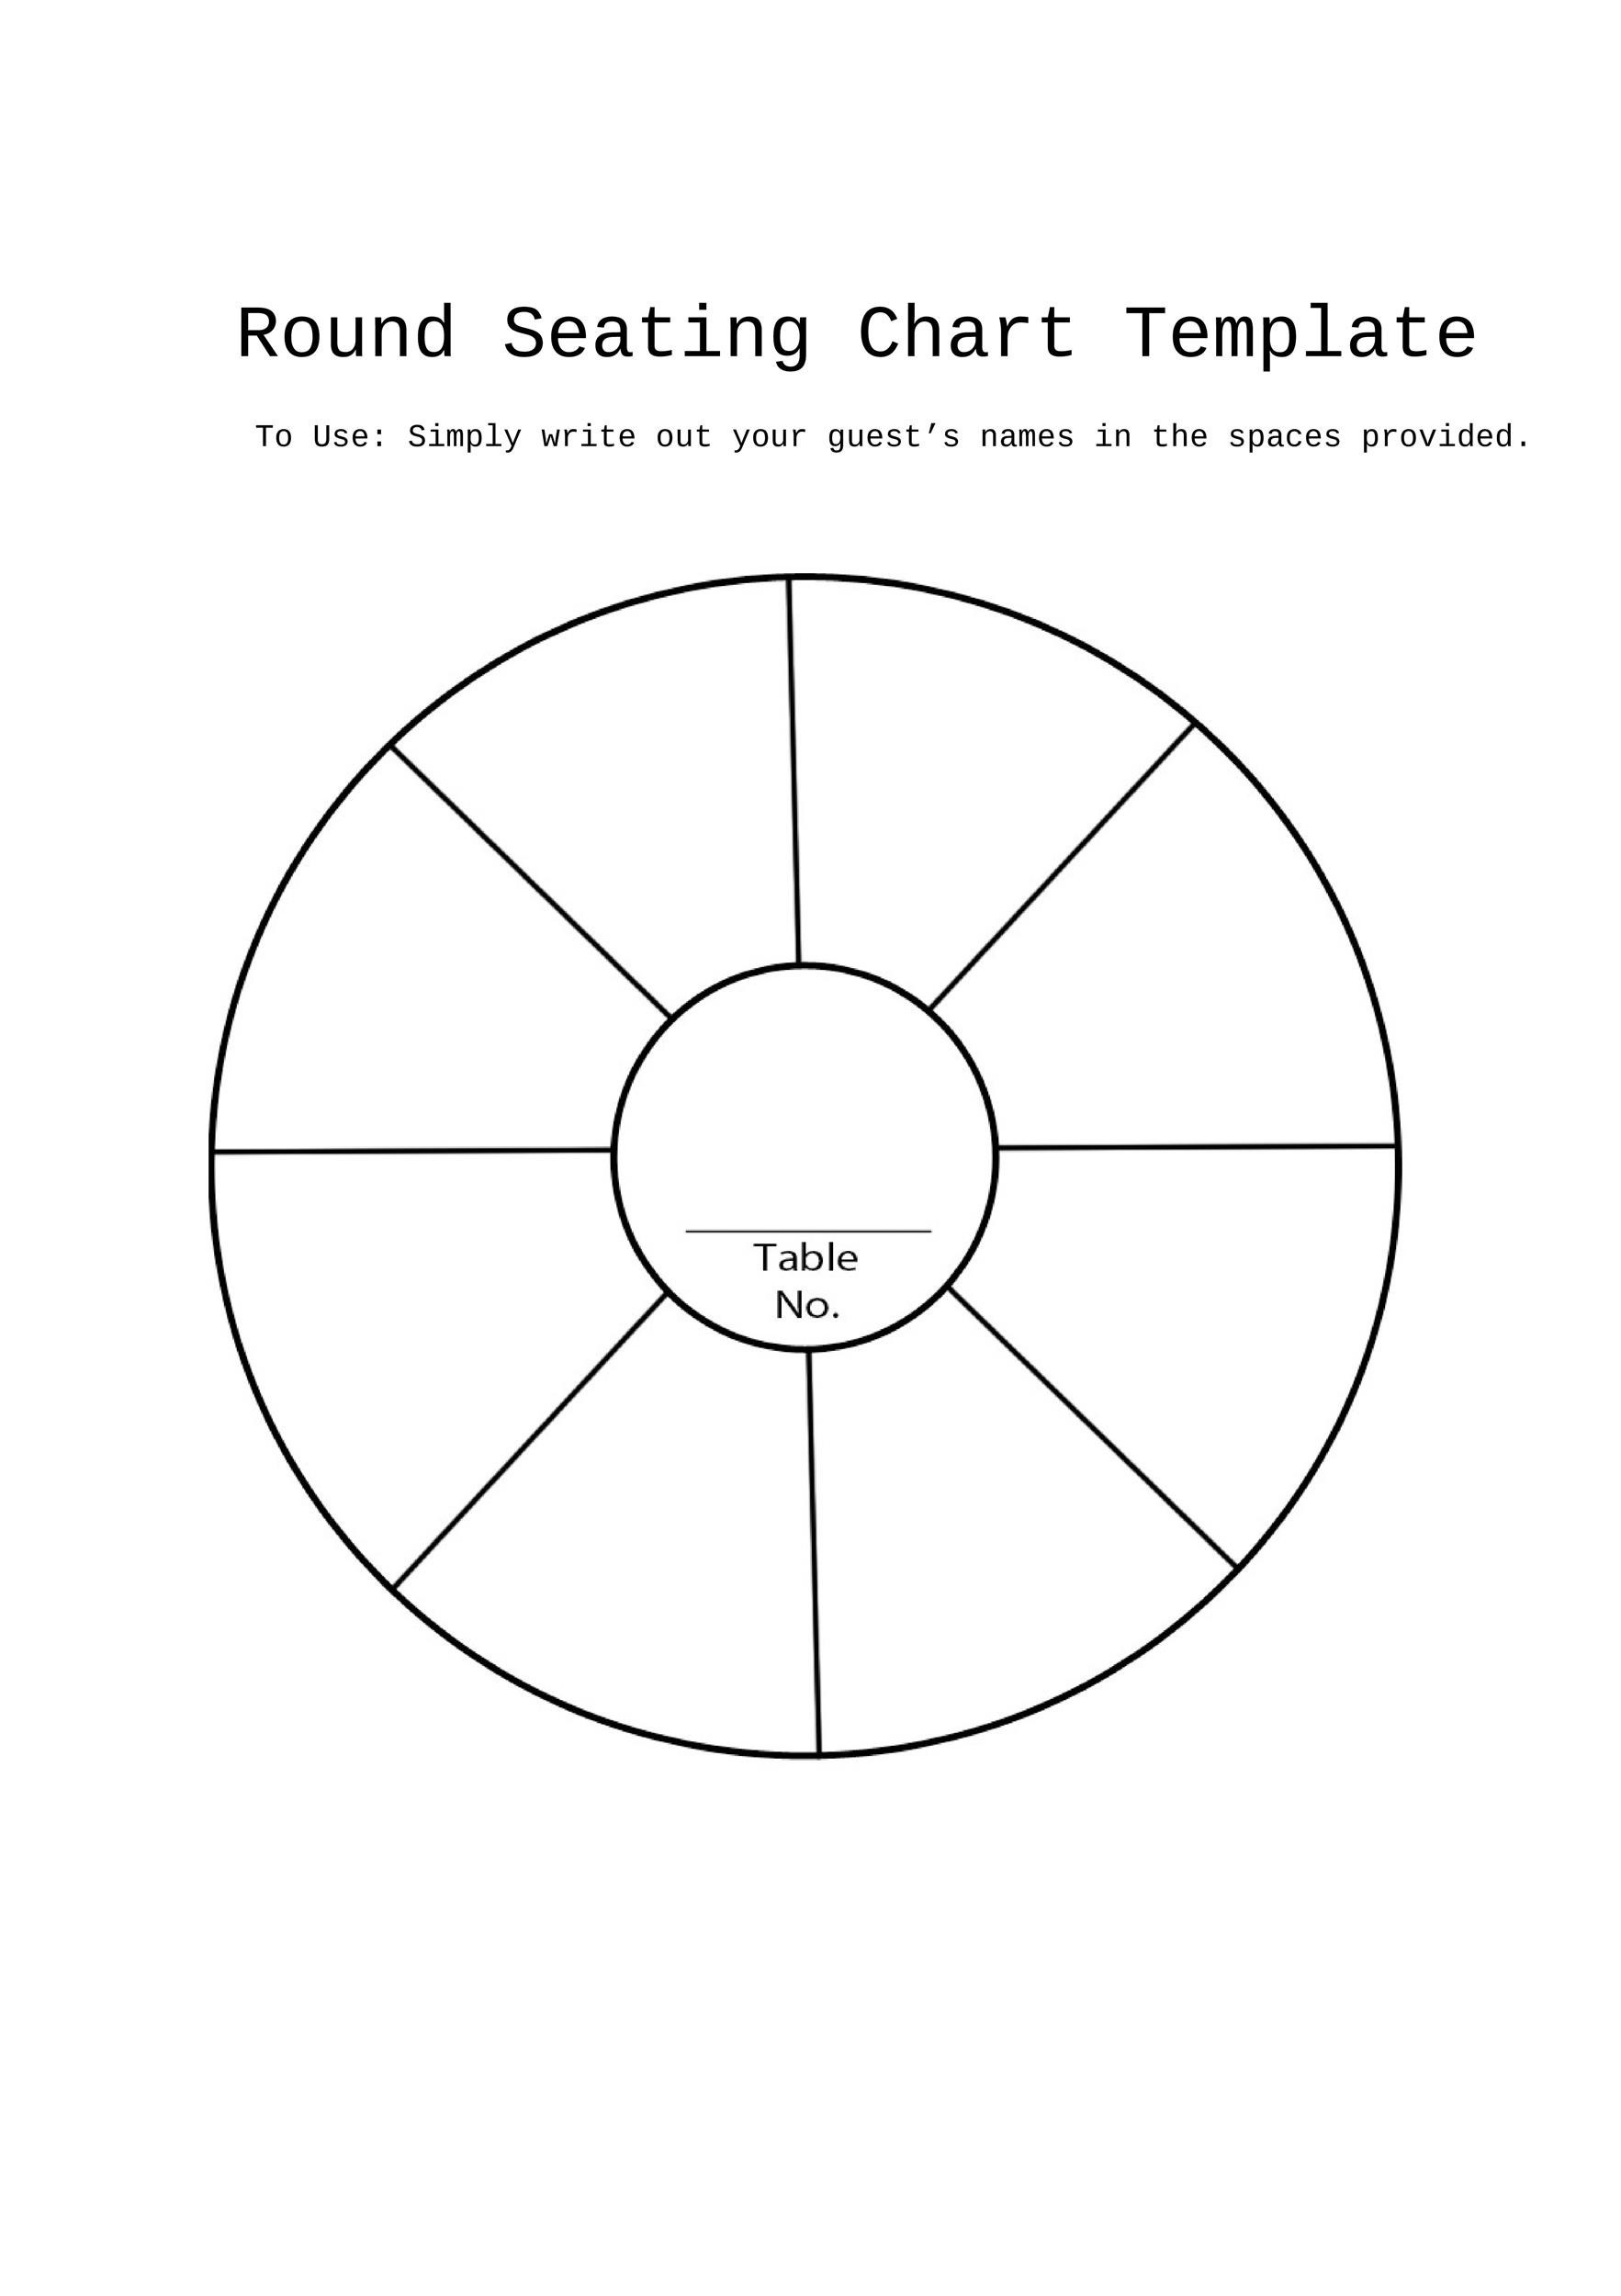 Round Table Seating Chart For 8 Brokeasshome